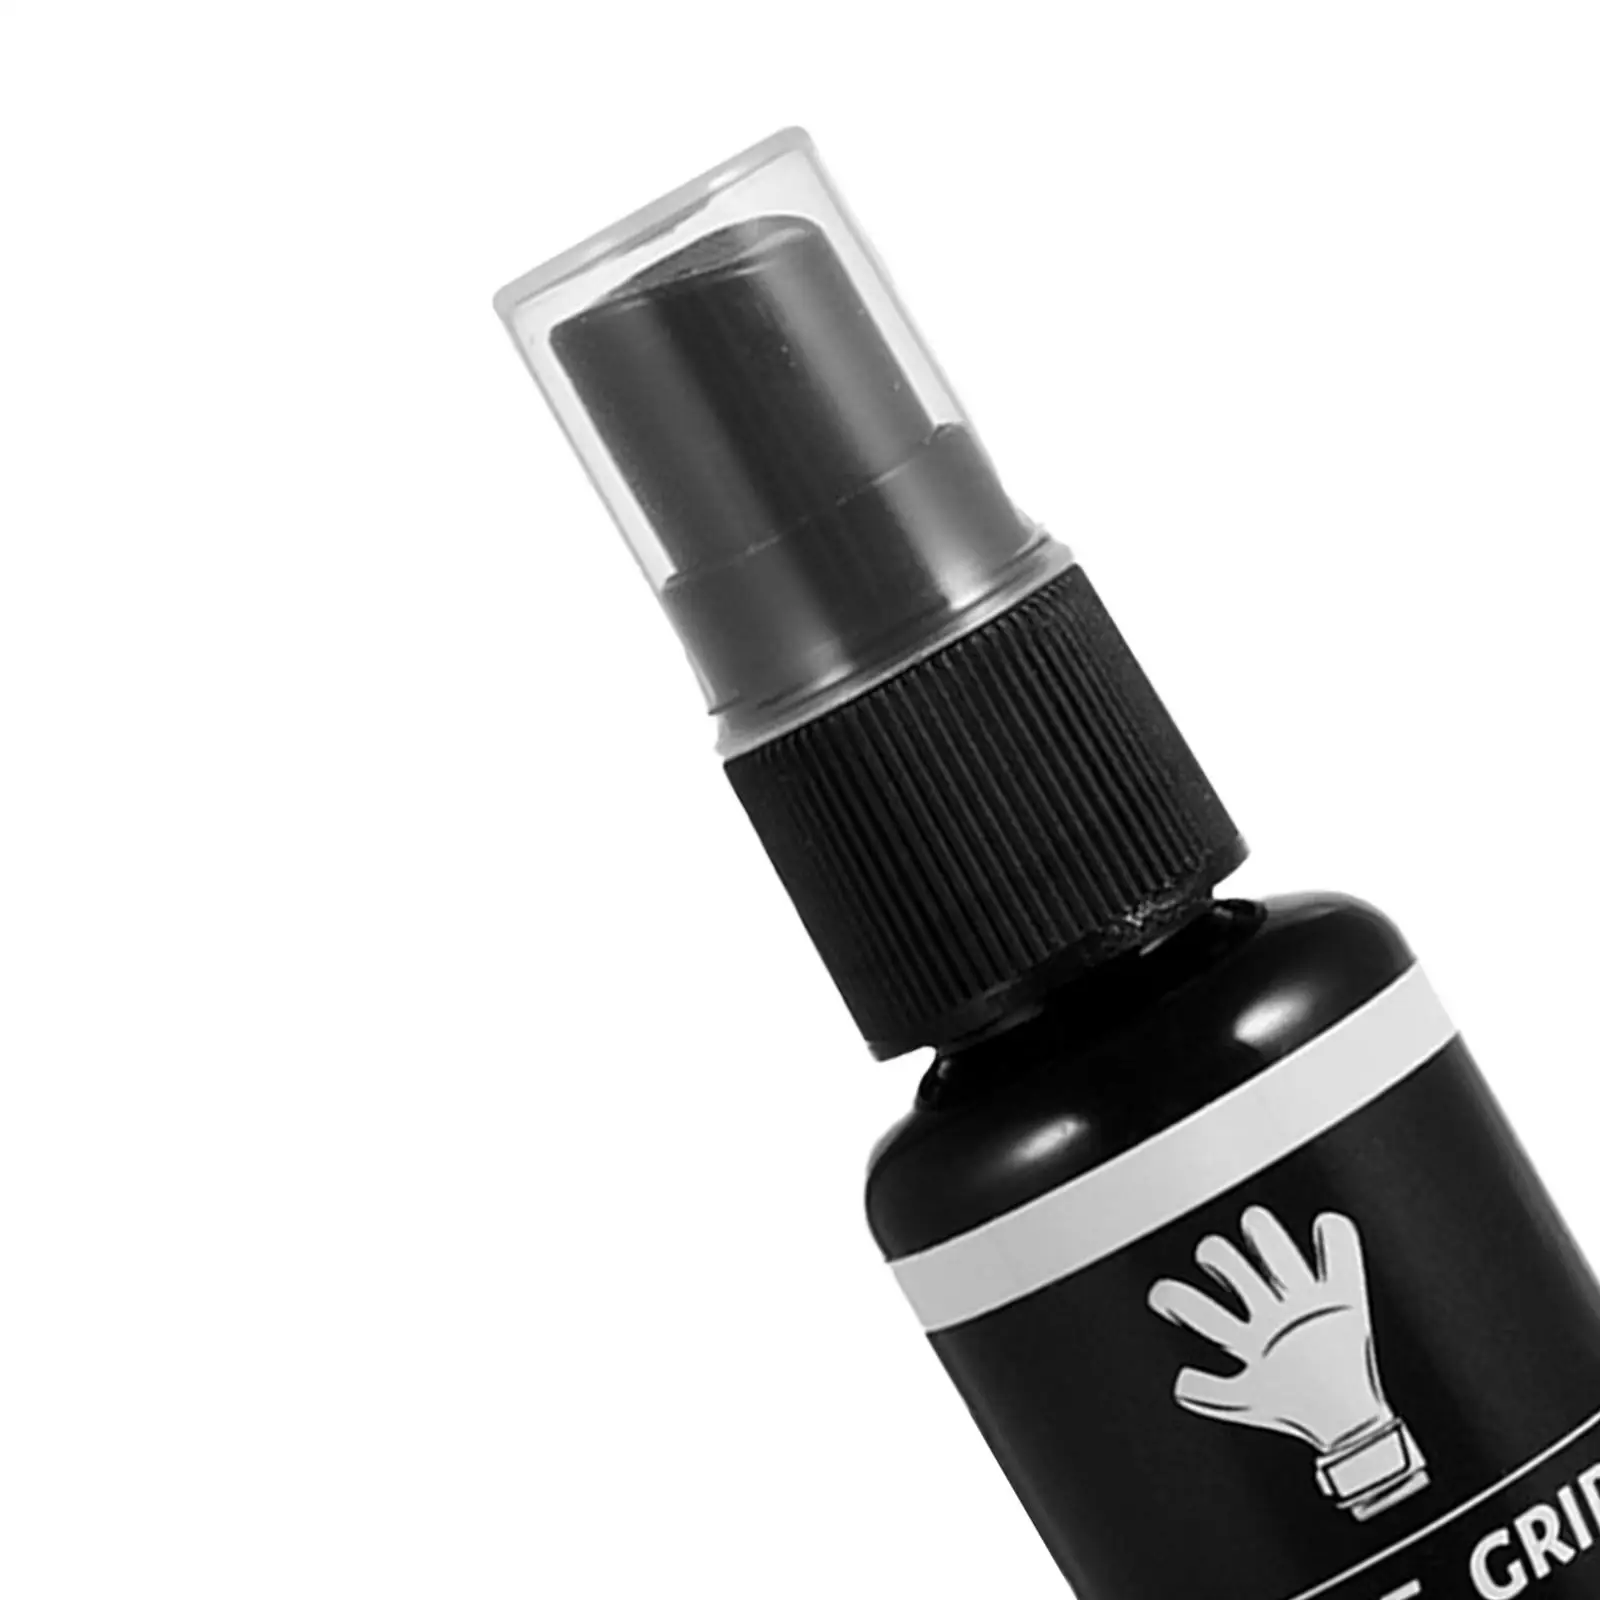 Football Grip Spray Football Firm Grip for Rugby Accessories Gloves Spray